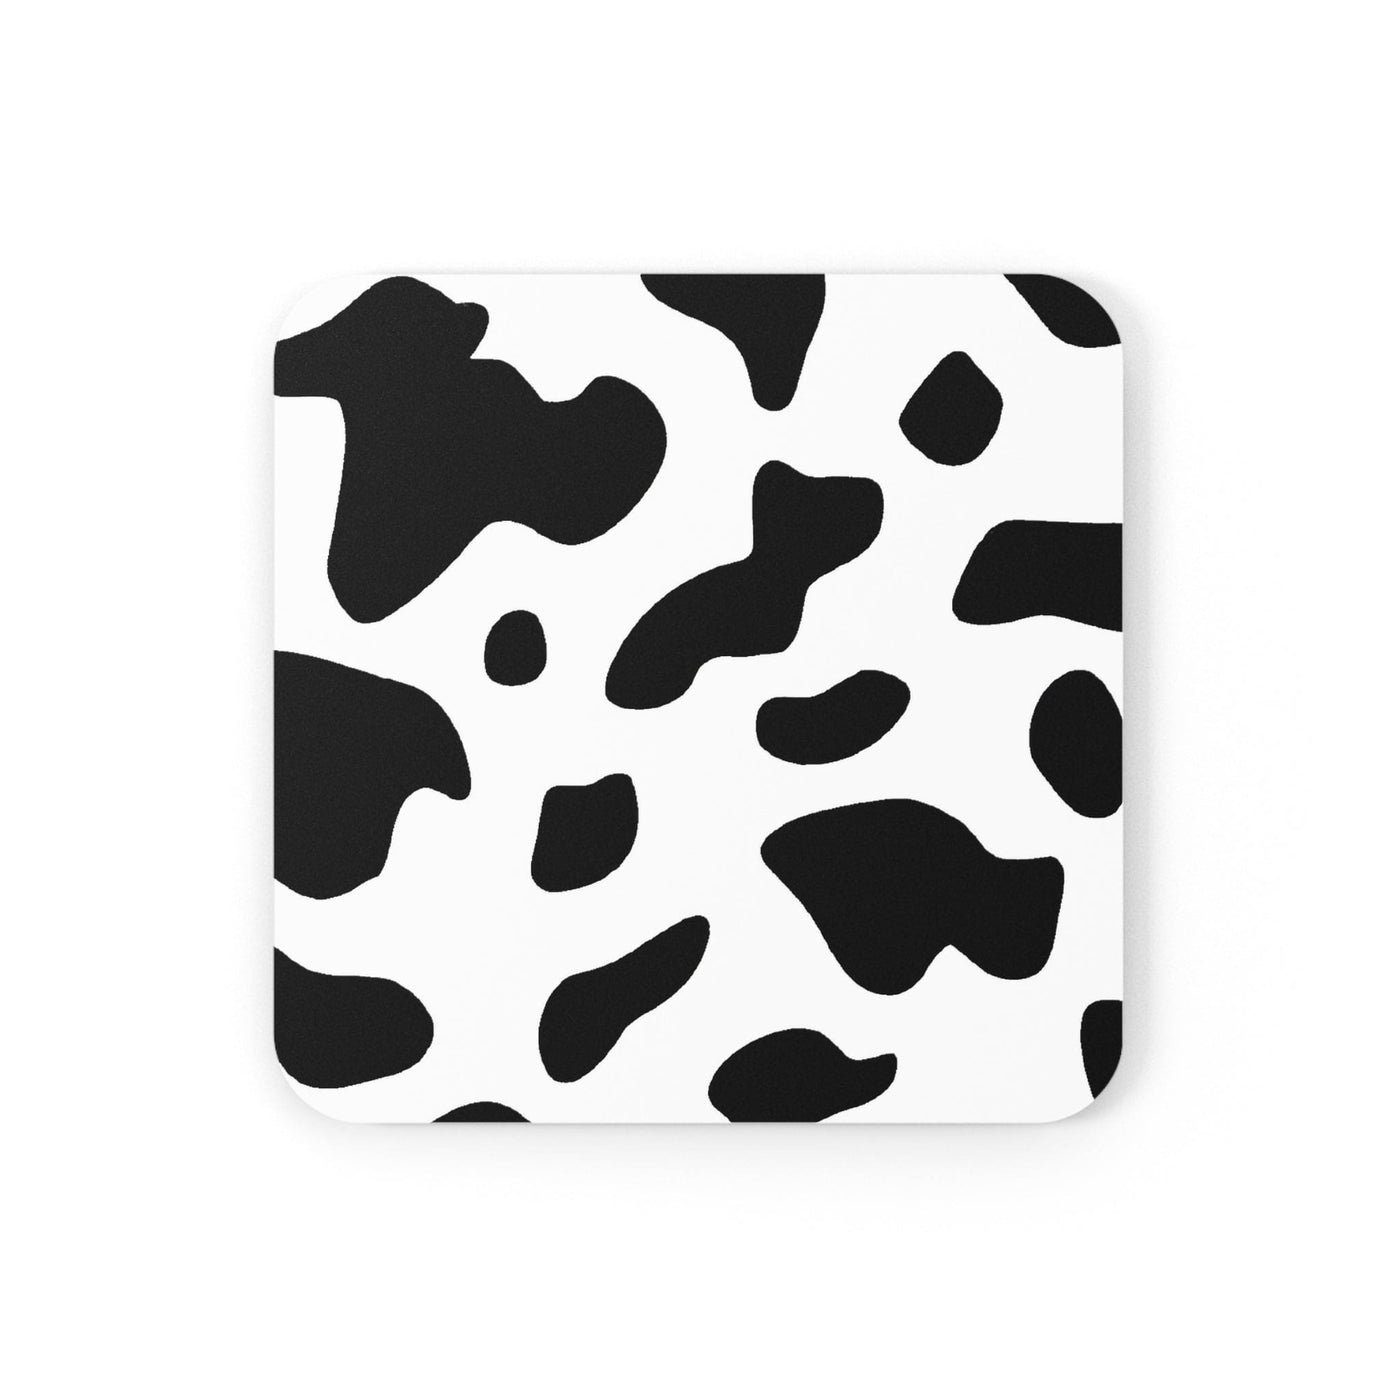 Coaster Set Of 4 For Drinks Black And White Cow Print - Decorative | Coasters